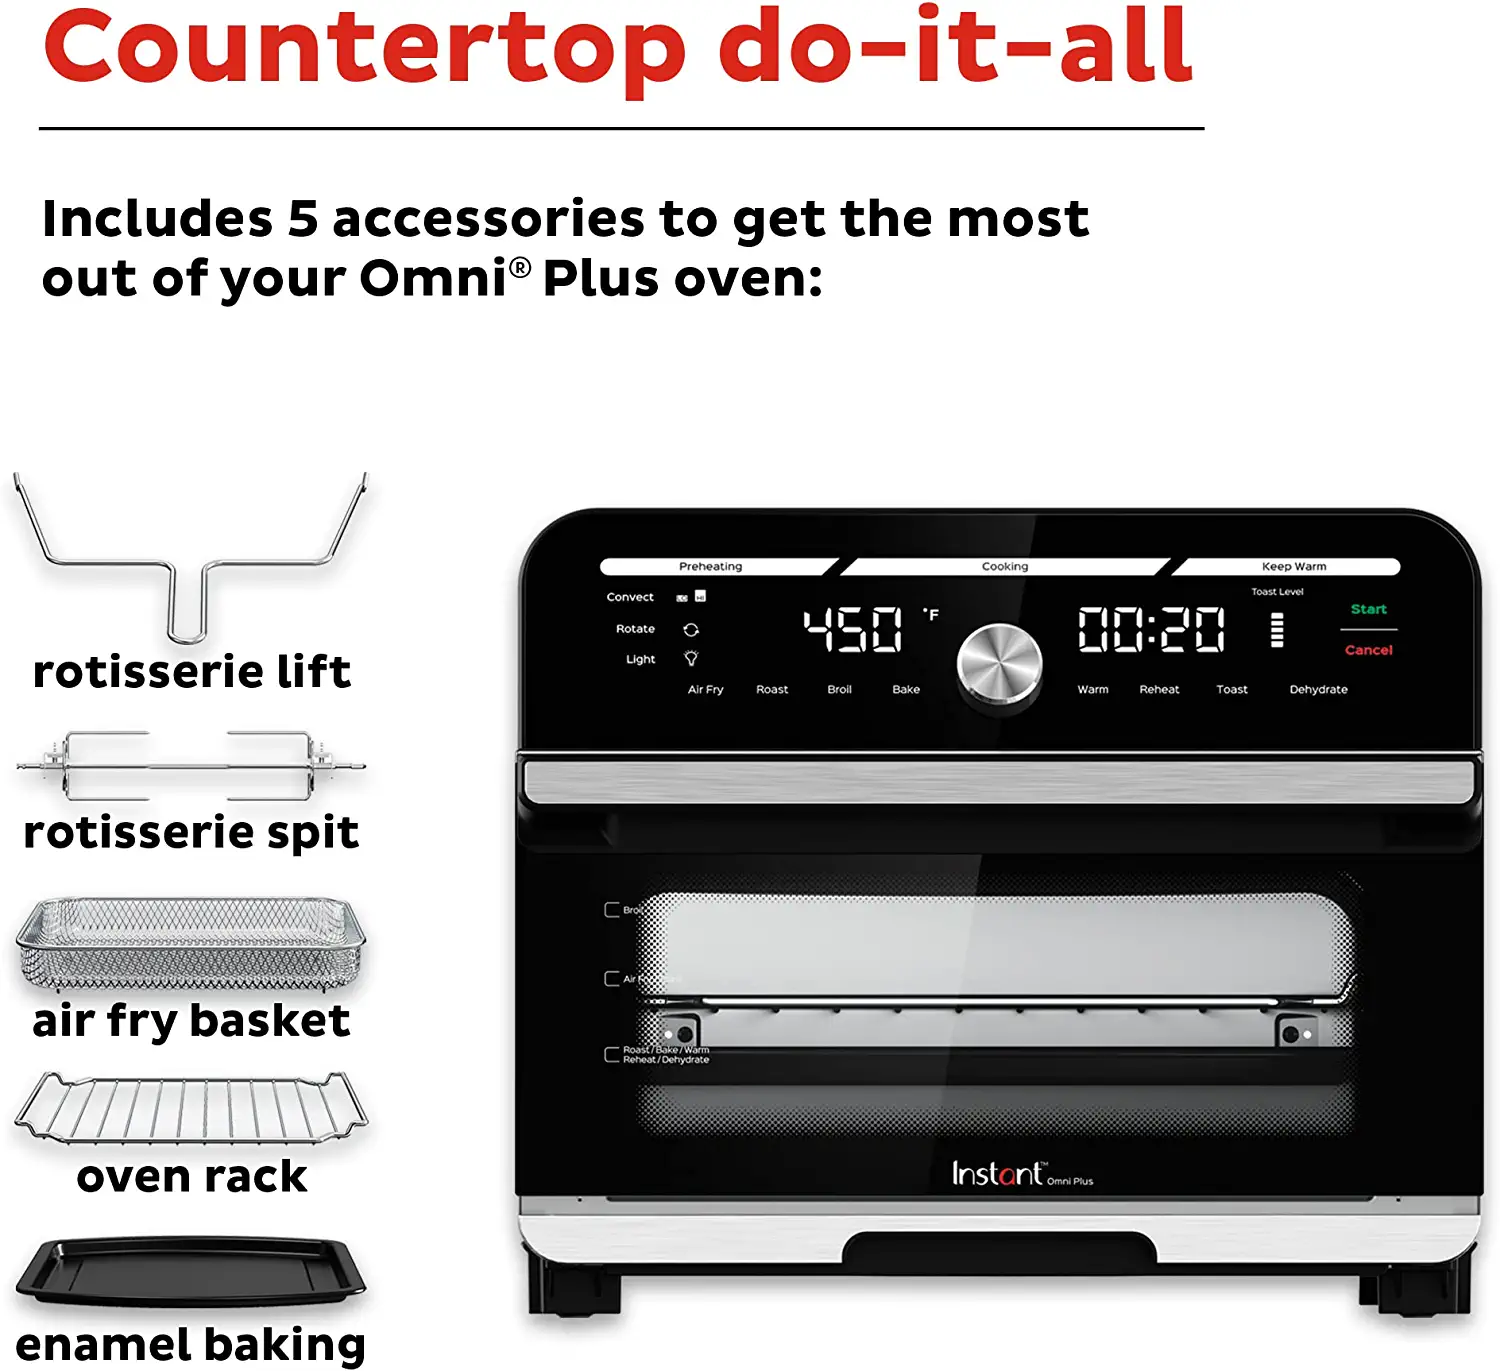 https://discounttoday.net/wp-content/uploads/2022/09/4Instant-Omni-Plus-19-QT-18L-Air-Fryer-Toaster-Oven-Combo-From-the-Makers-of-Instant-Pot-10-in-1-Functions-Fits-a-12-Pizza-6-Slices-of-Bread-App-with-Over-100-Recipes-Stainless-Steel.webp